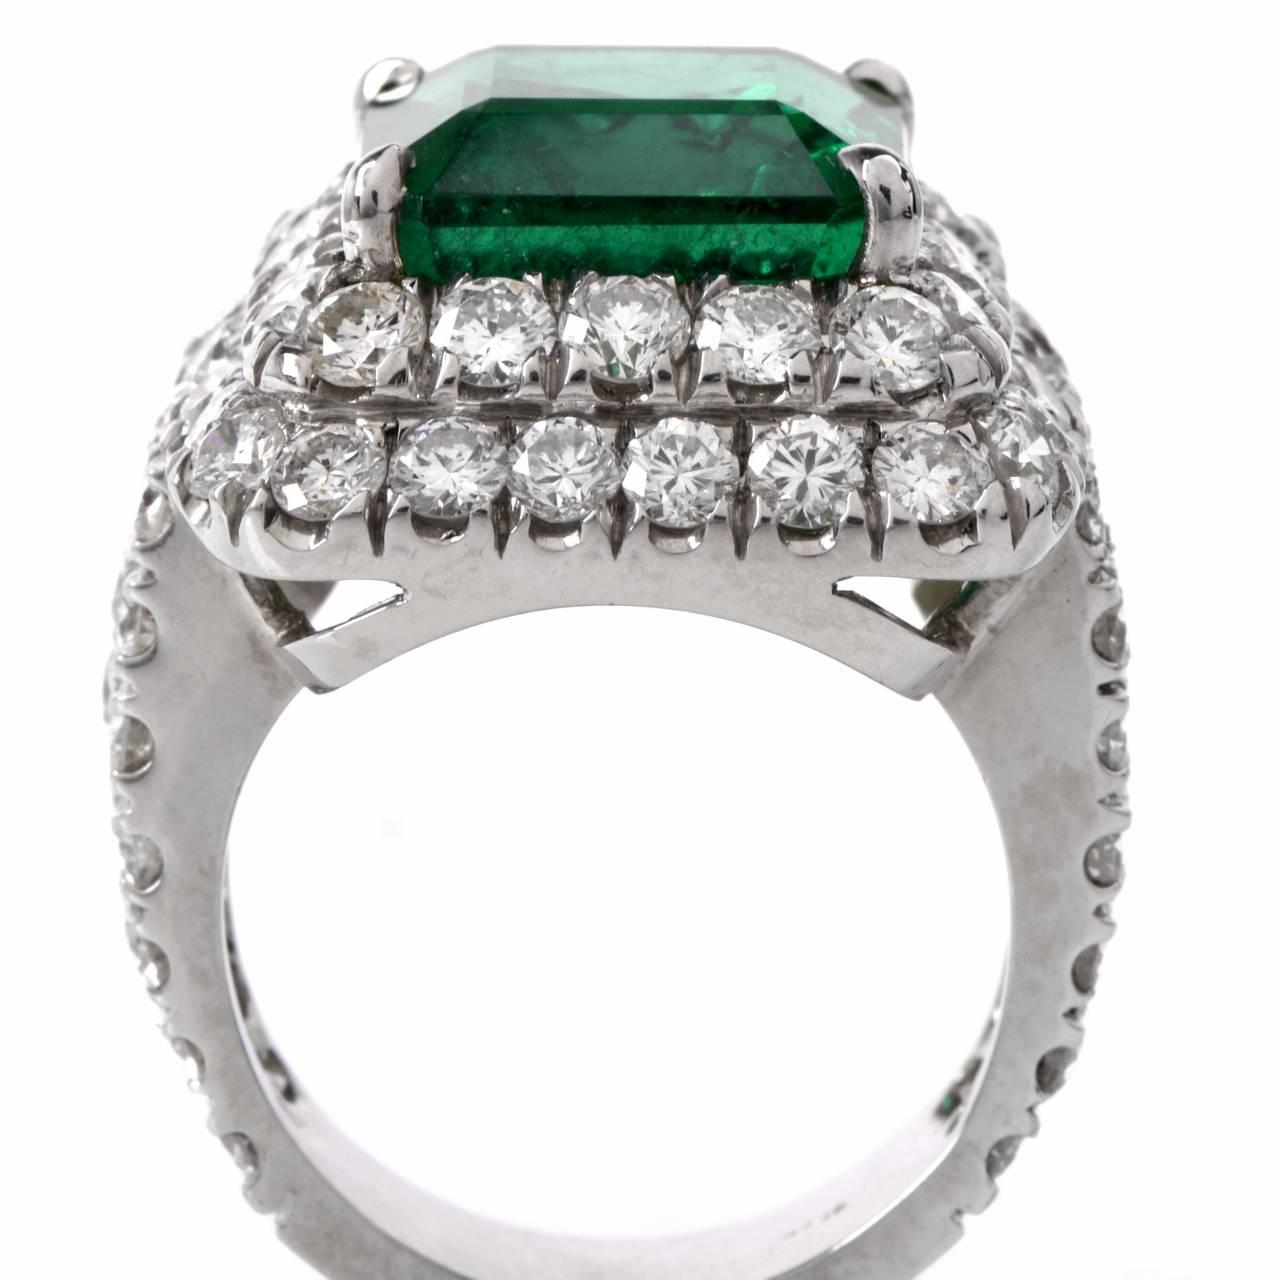 Exceptional 13.67cts Emerald and Diamond Platinum Cocktail Ring In Excellent Condition For Sale In Miami, FL